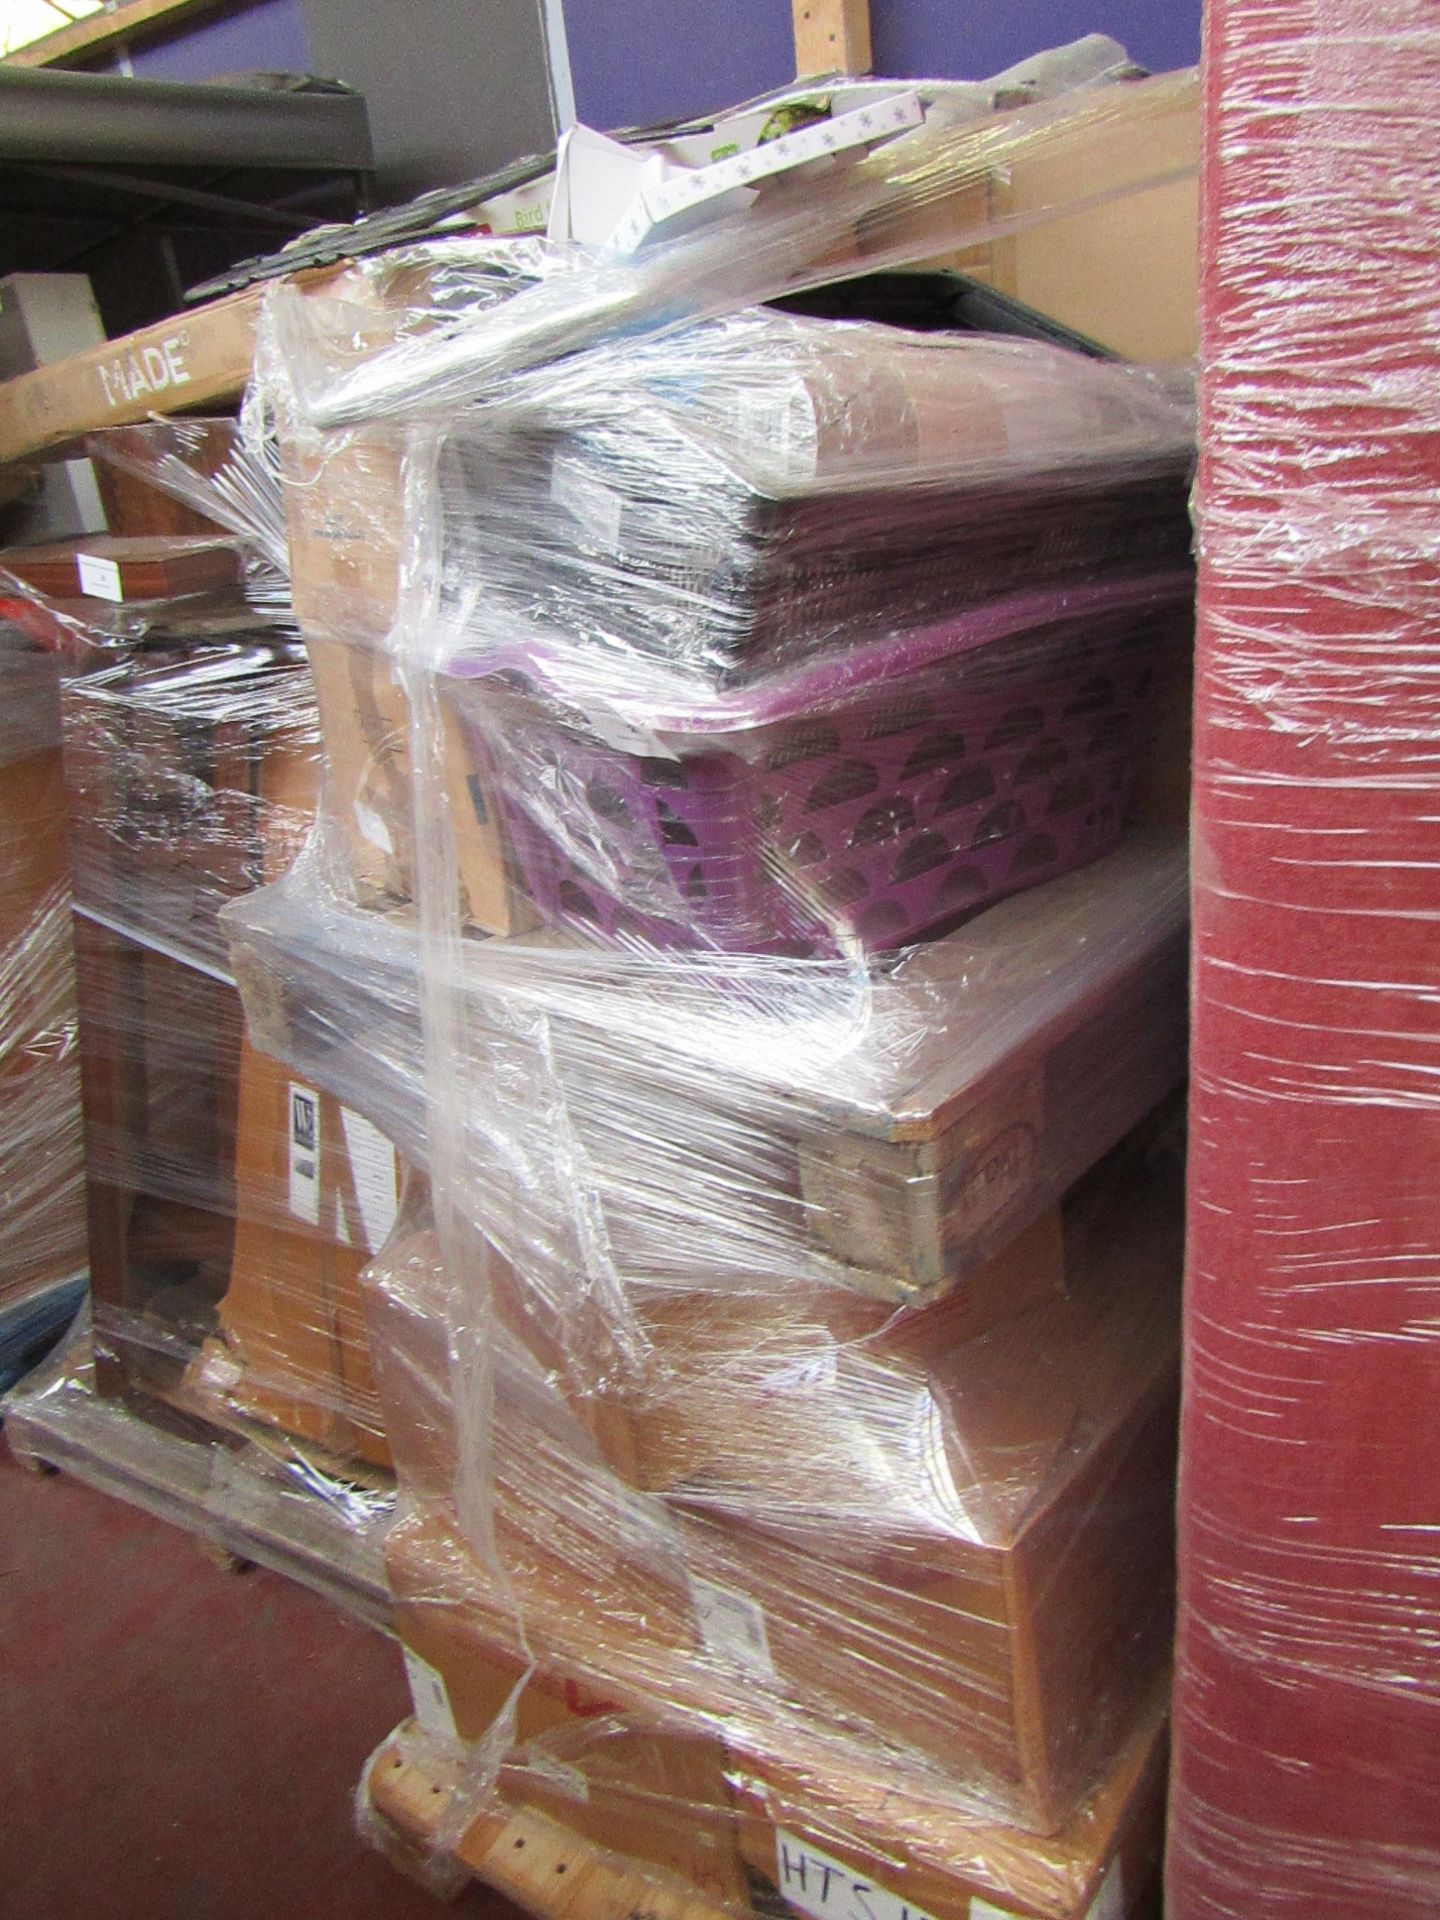 A pallet of Mixed raw customer returns and sample stock, the pallet is unmanifested and typically